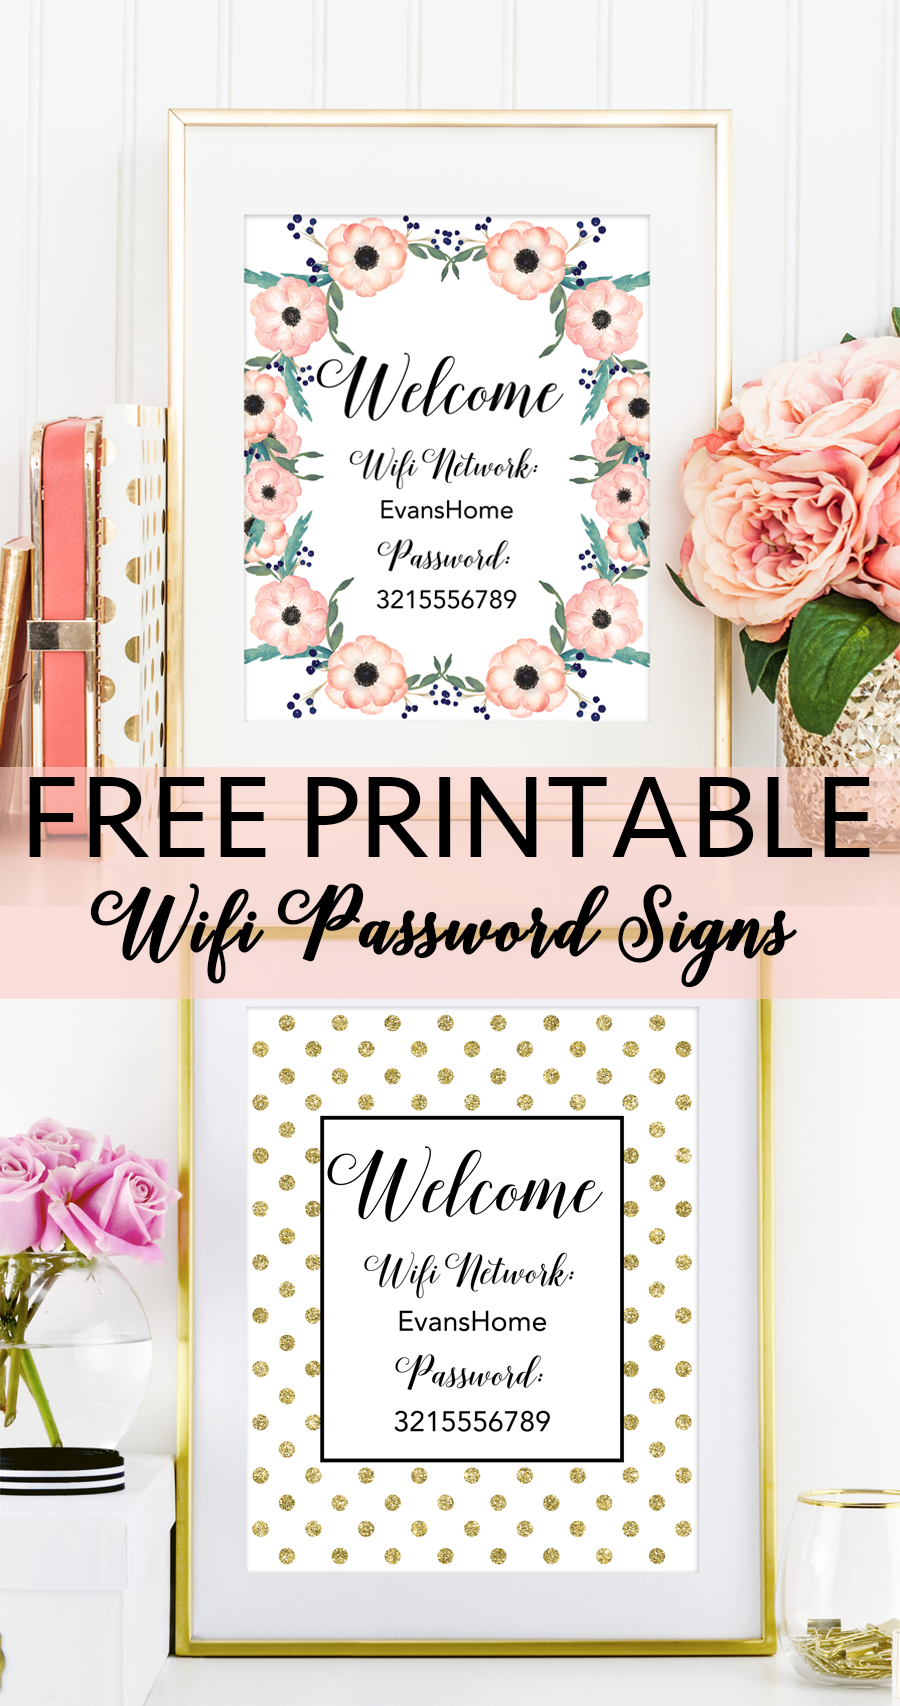 Free Printable Wifi Password Signs | Decorating Ideas - Home Decor - Free Printable Wifi Sign